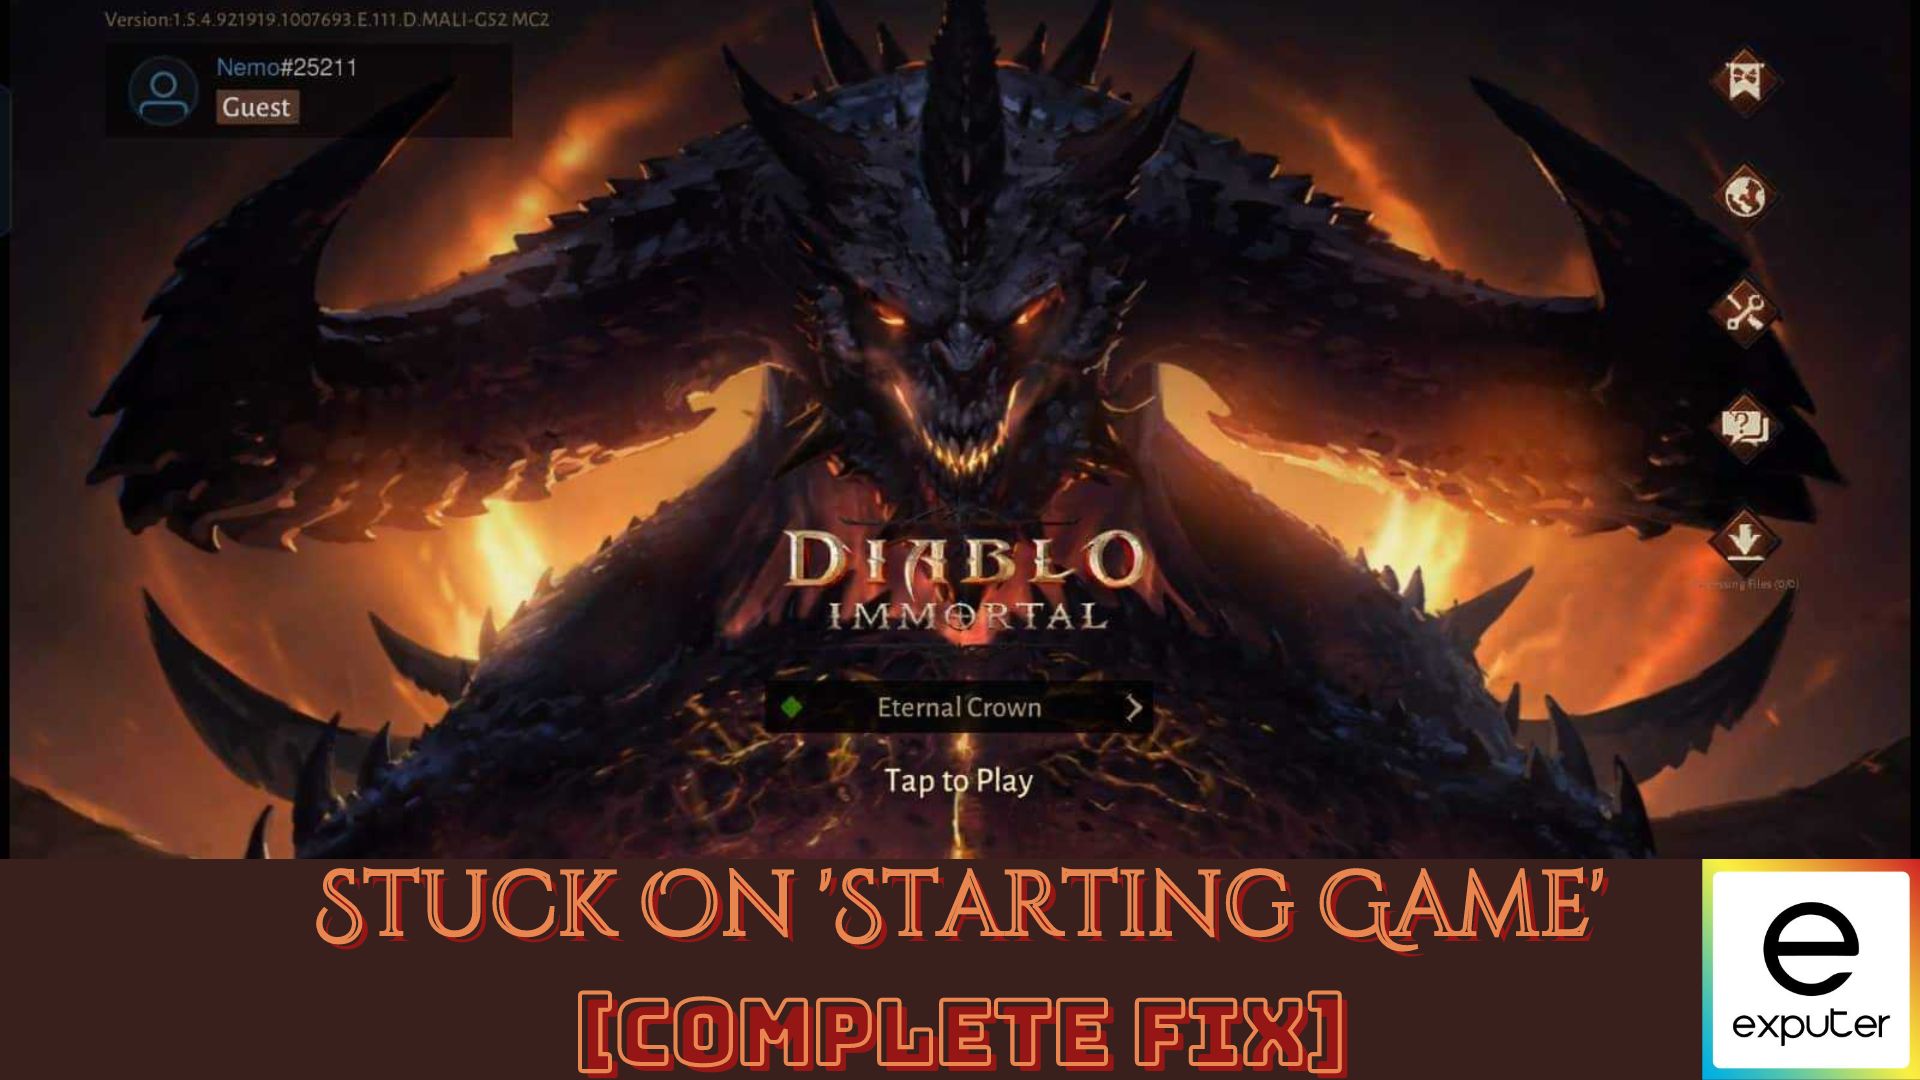 Stuck in a game : r/Demonfall